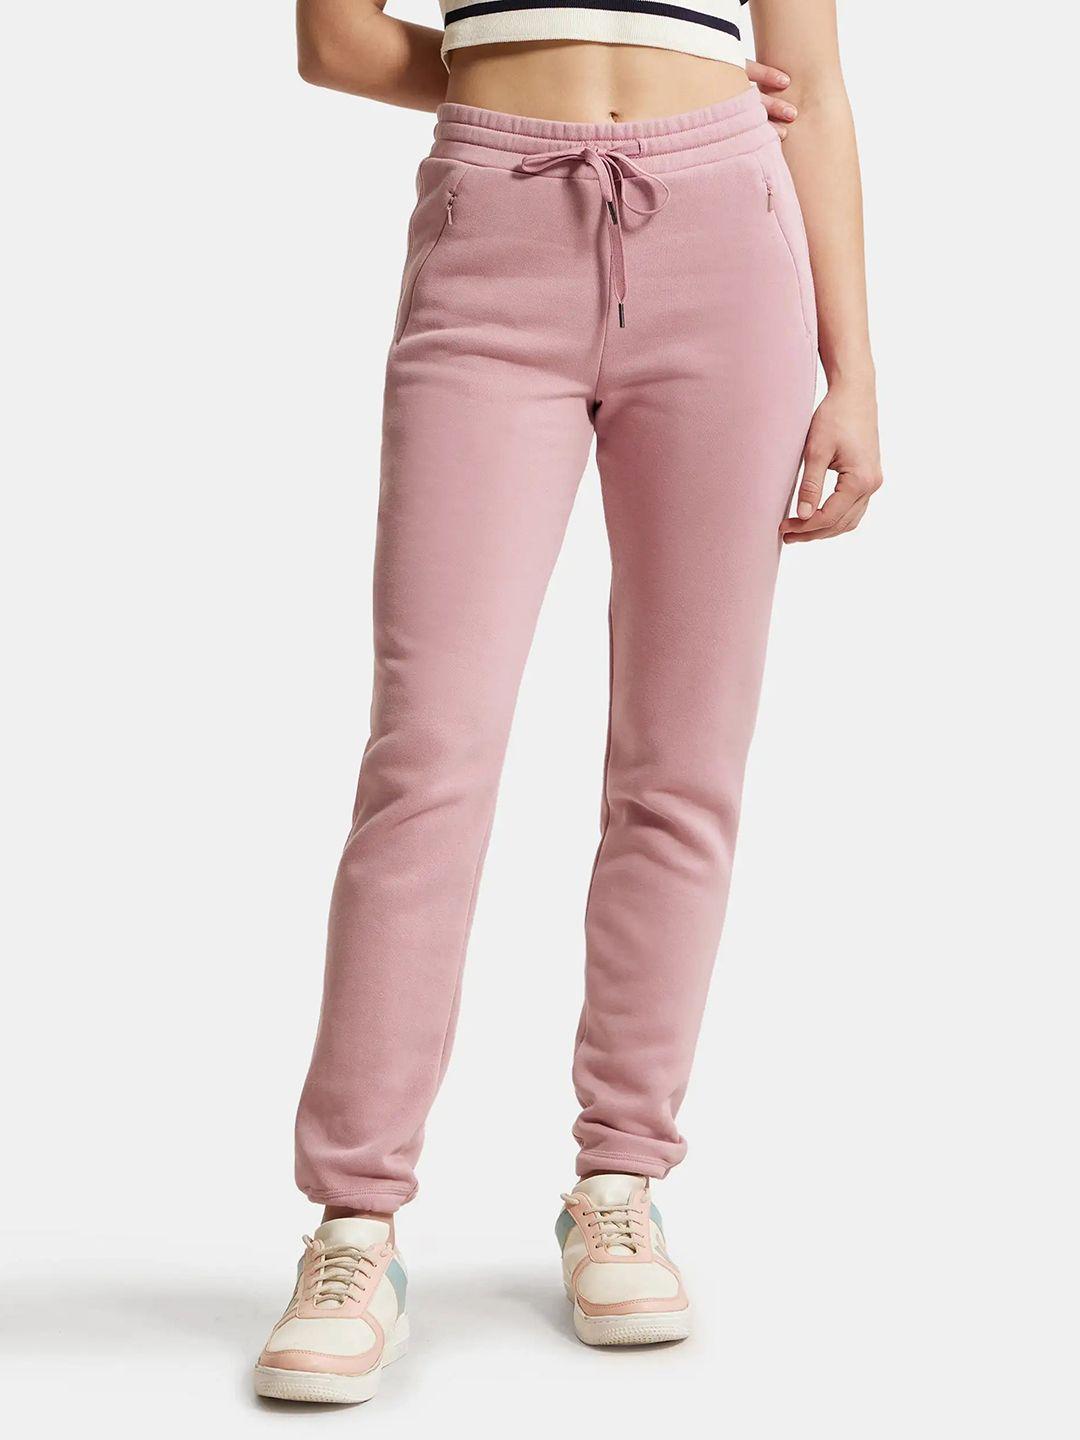 jockey women relaxed fit cotton track pants